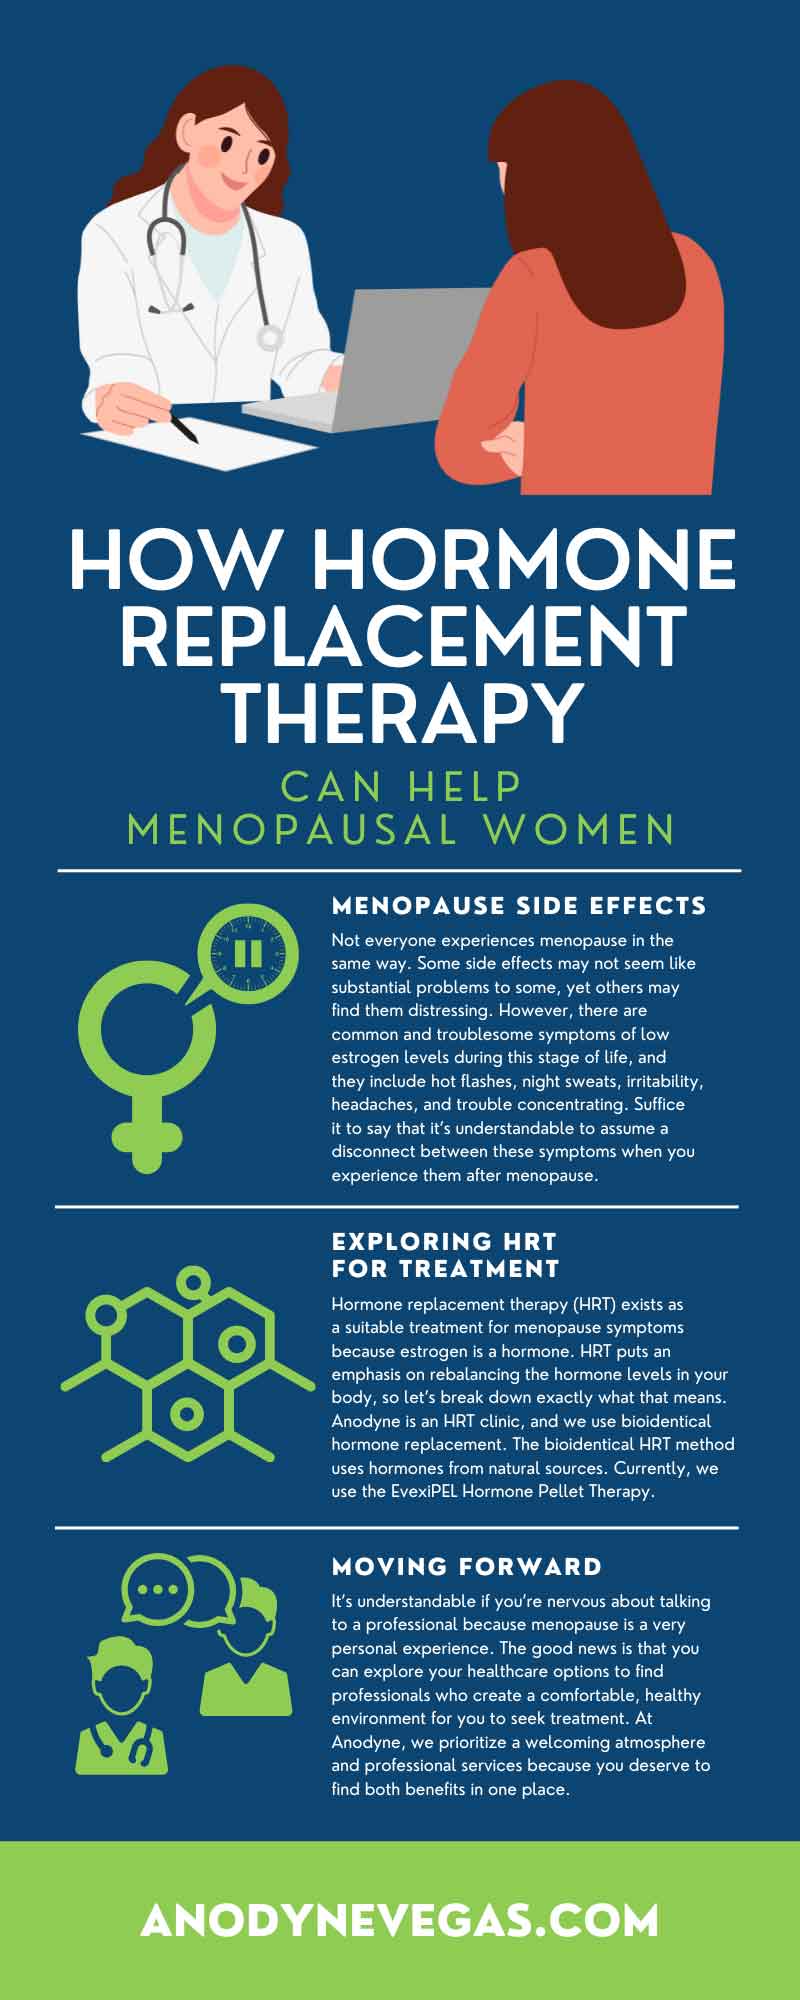 How Hormone Replacement Therapy Can Help Menopausal Women